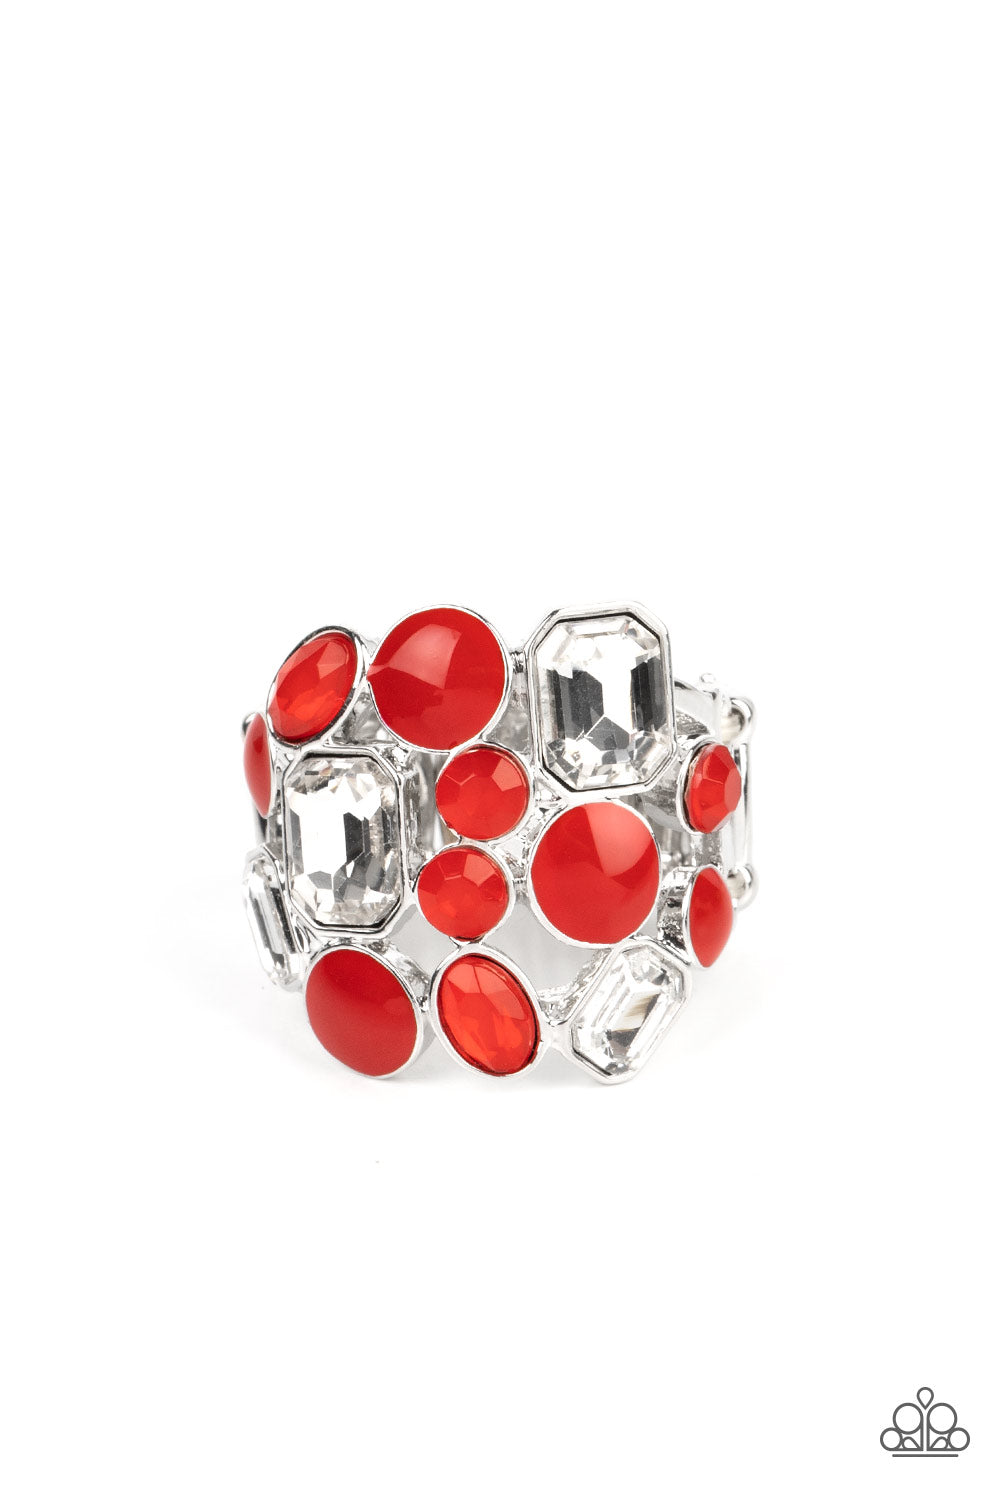 Multichromatic Meditation Red Ring - Paparazzi Accessories  Sparkling white emerald-cut gems, red rhinestones, and red enamel-coated circles in varying sizes gather into an ethereal cluster atop the finger. Features a stretchy band for a flexible fit.  Sold as one individual ring.